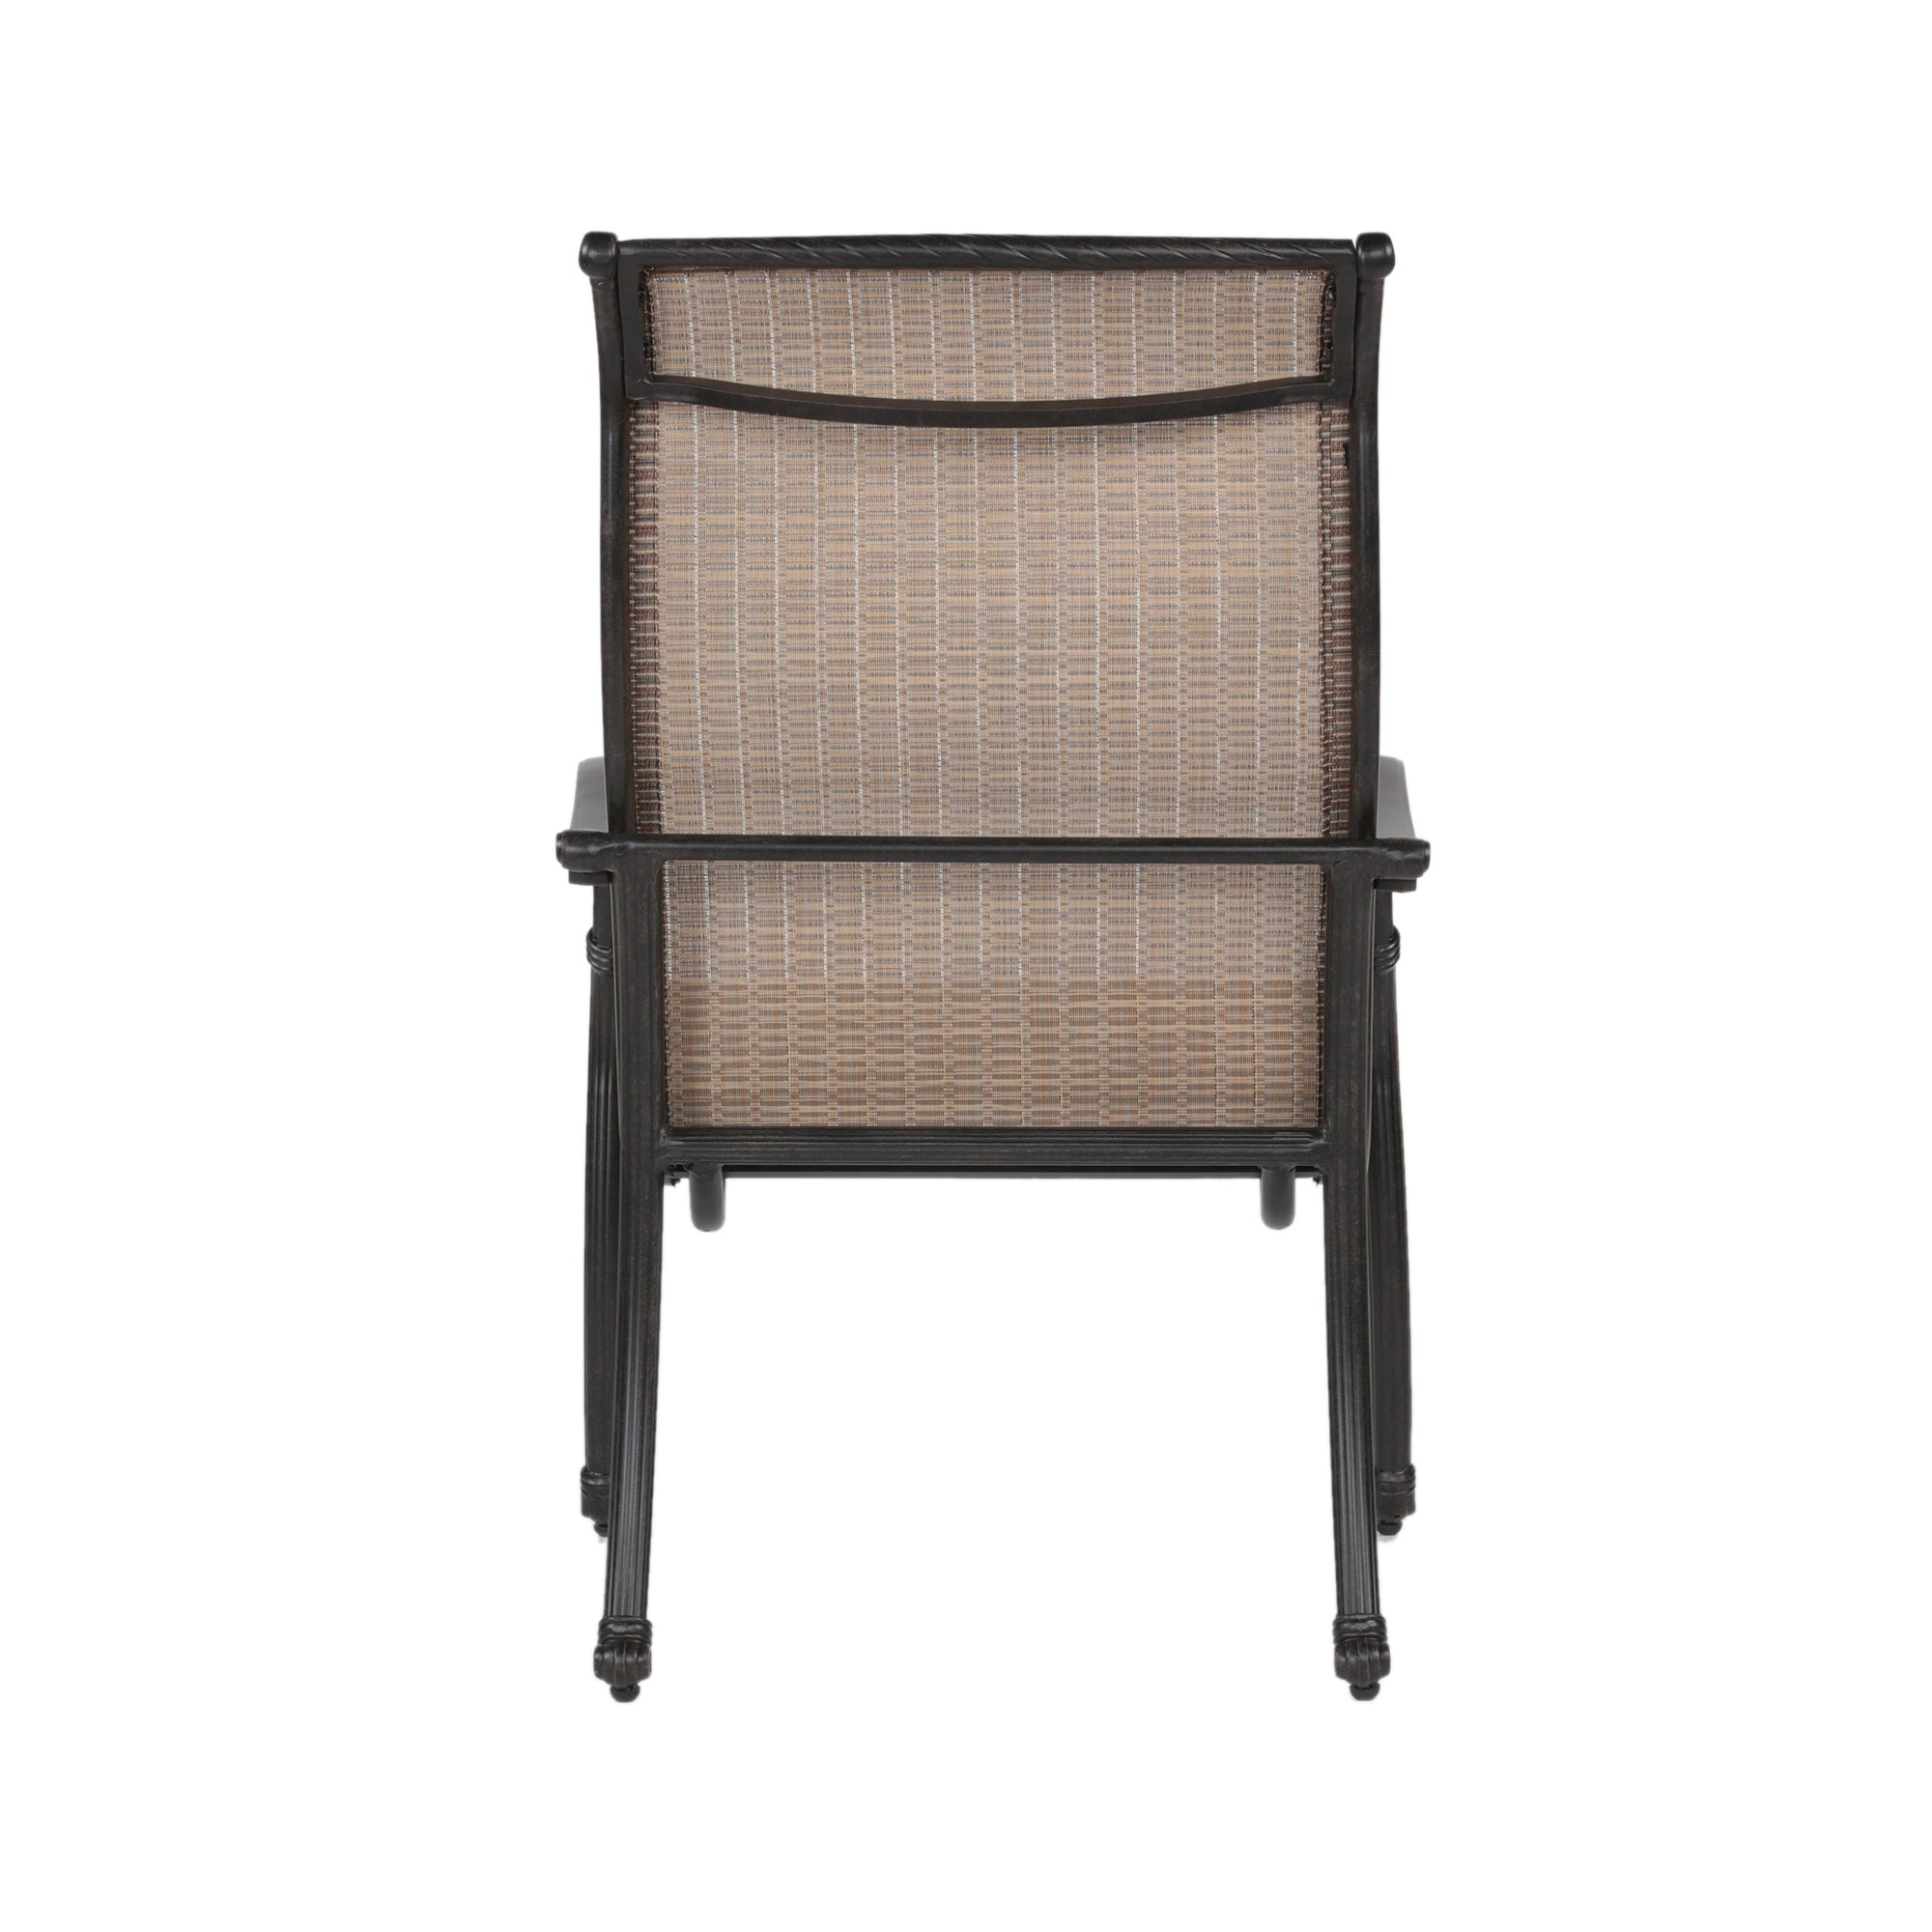 Patio Outdoor Sling Patio 2 Chairs With Aluminum